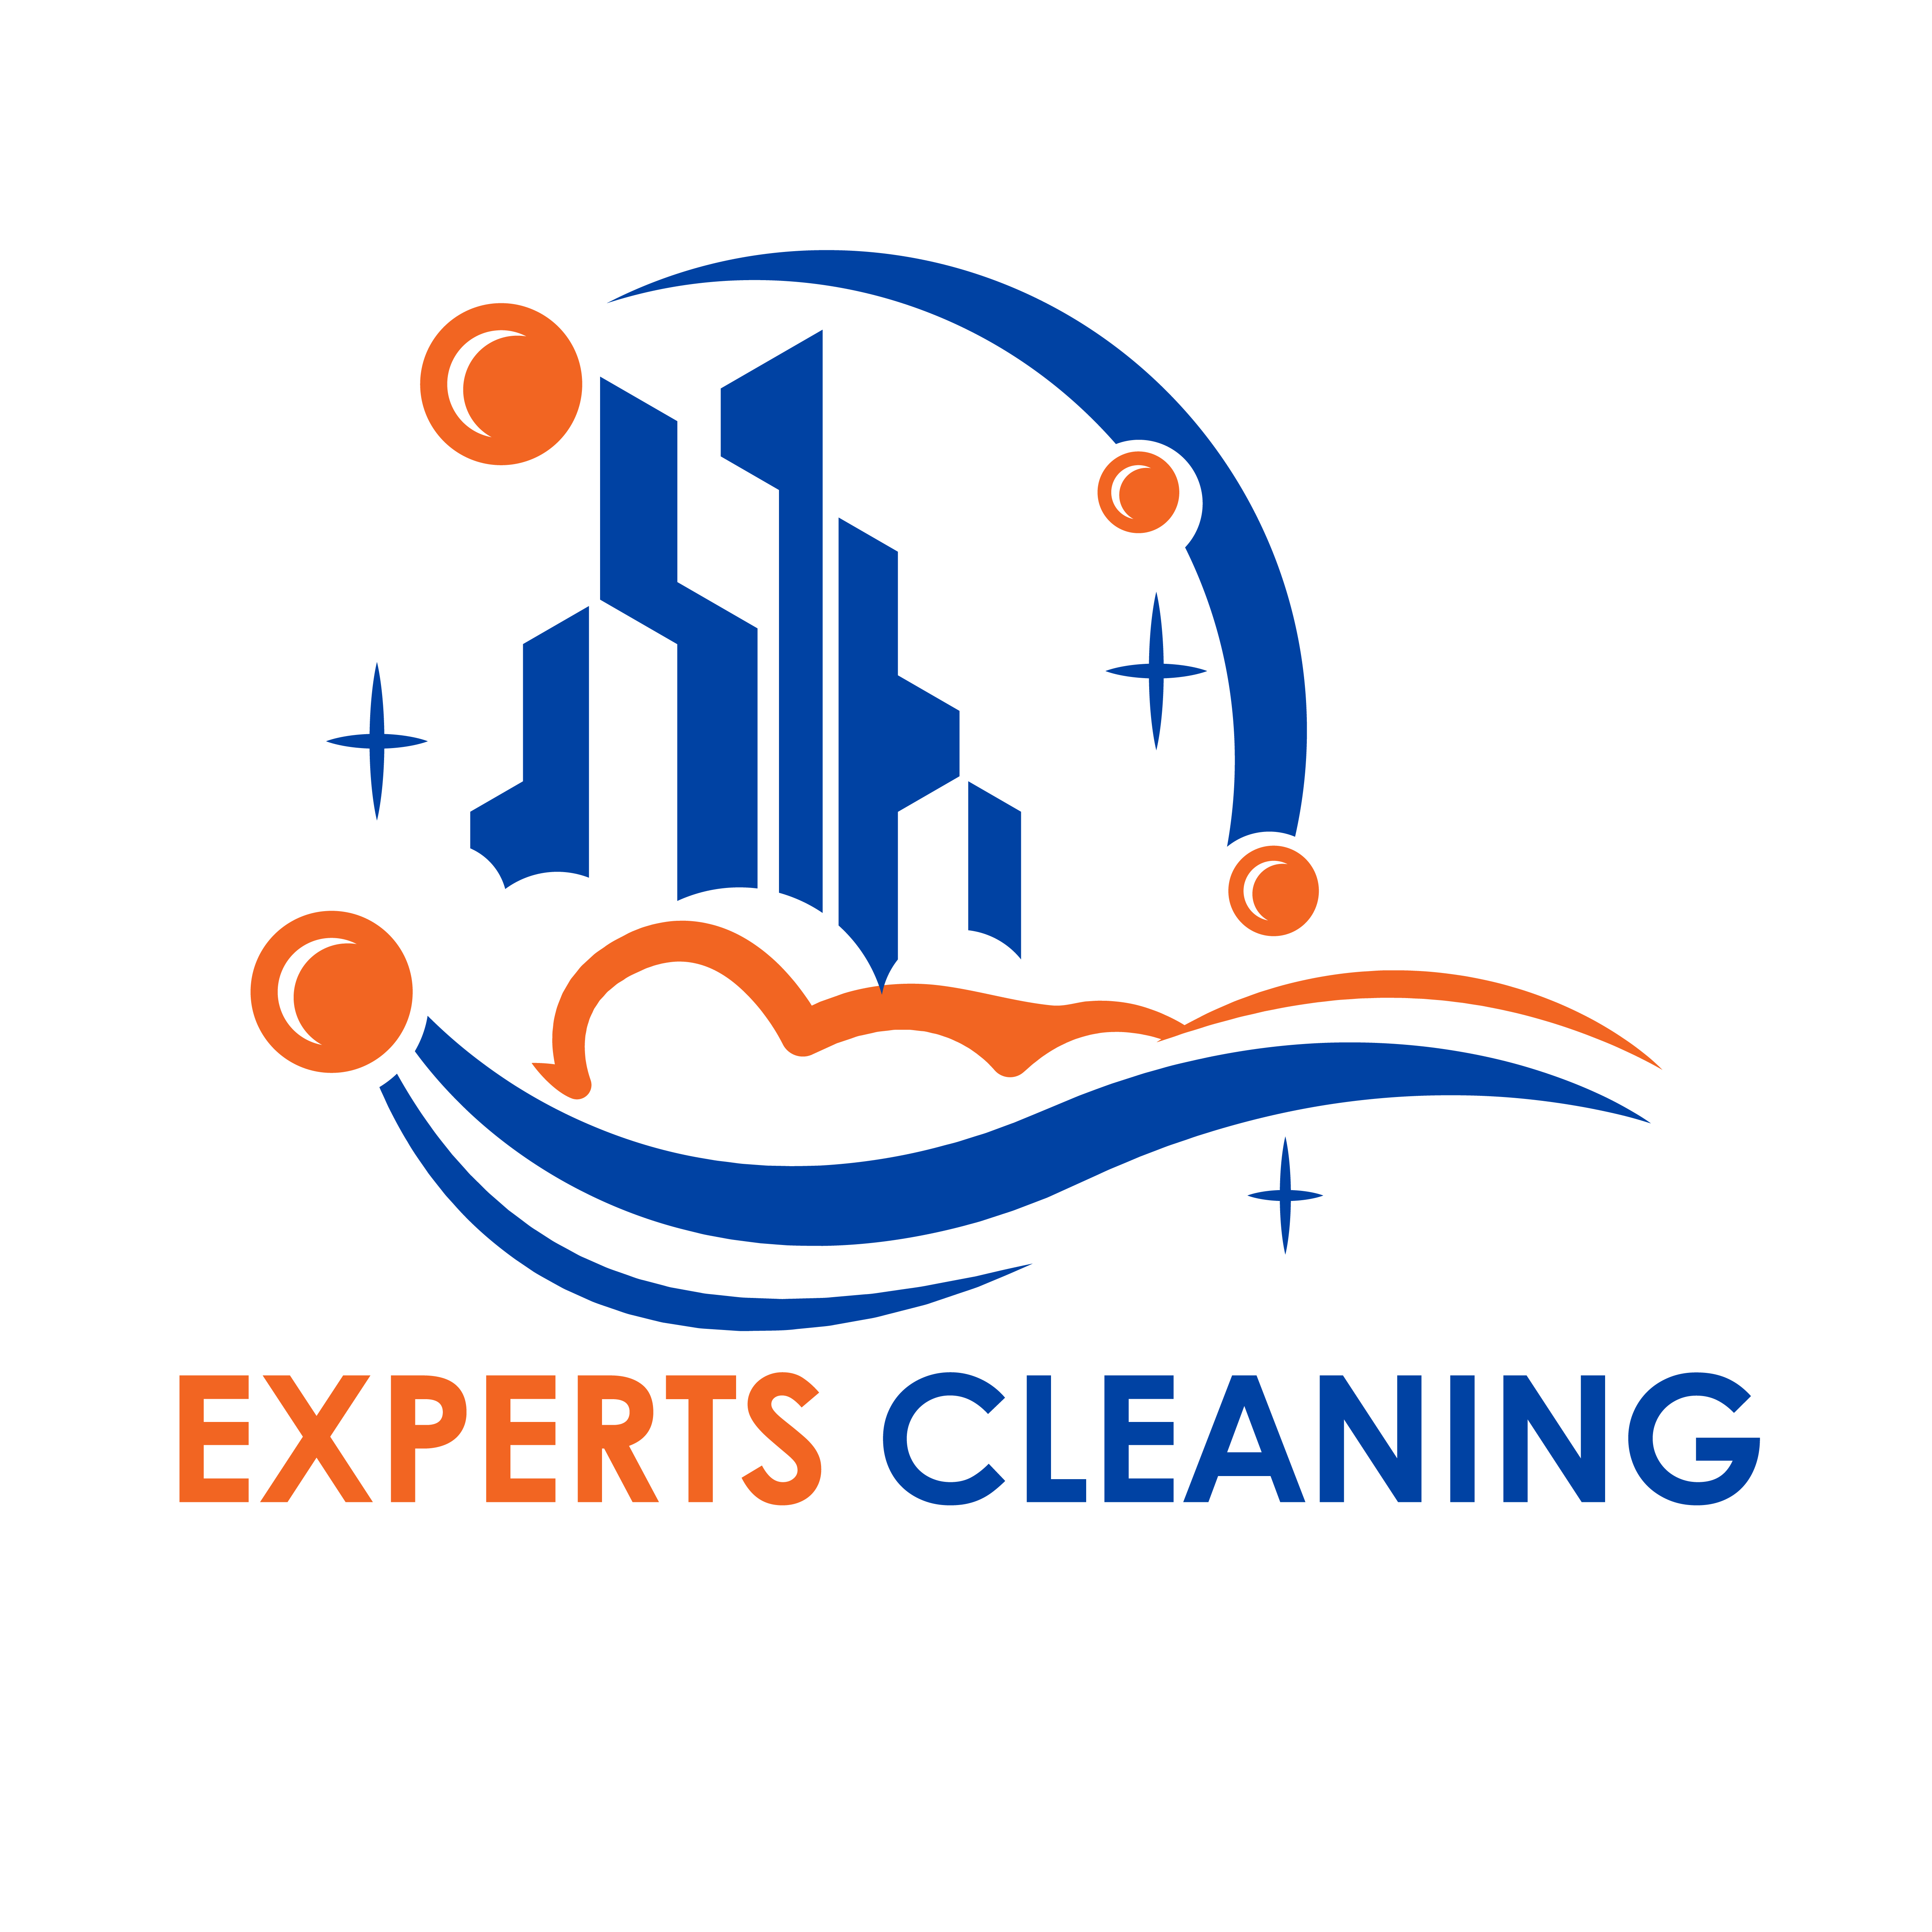 Experts Cleaning